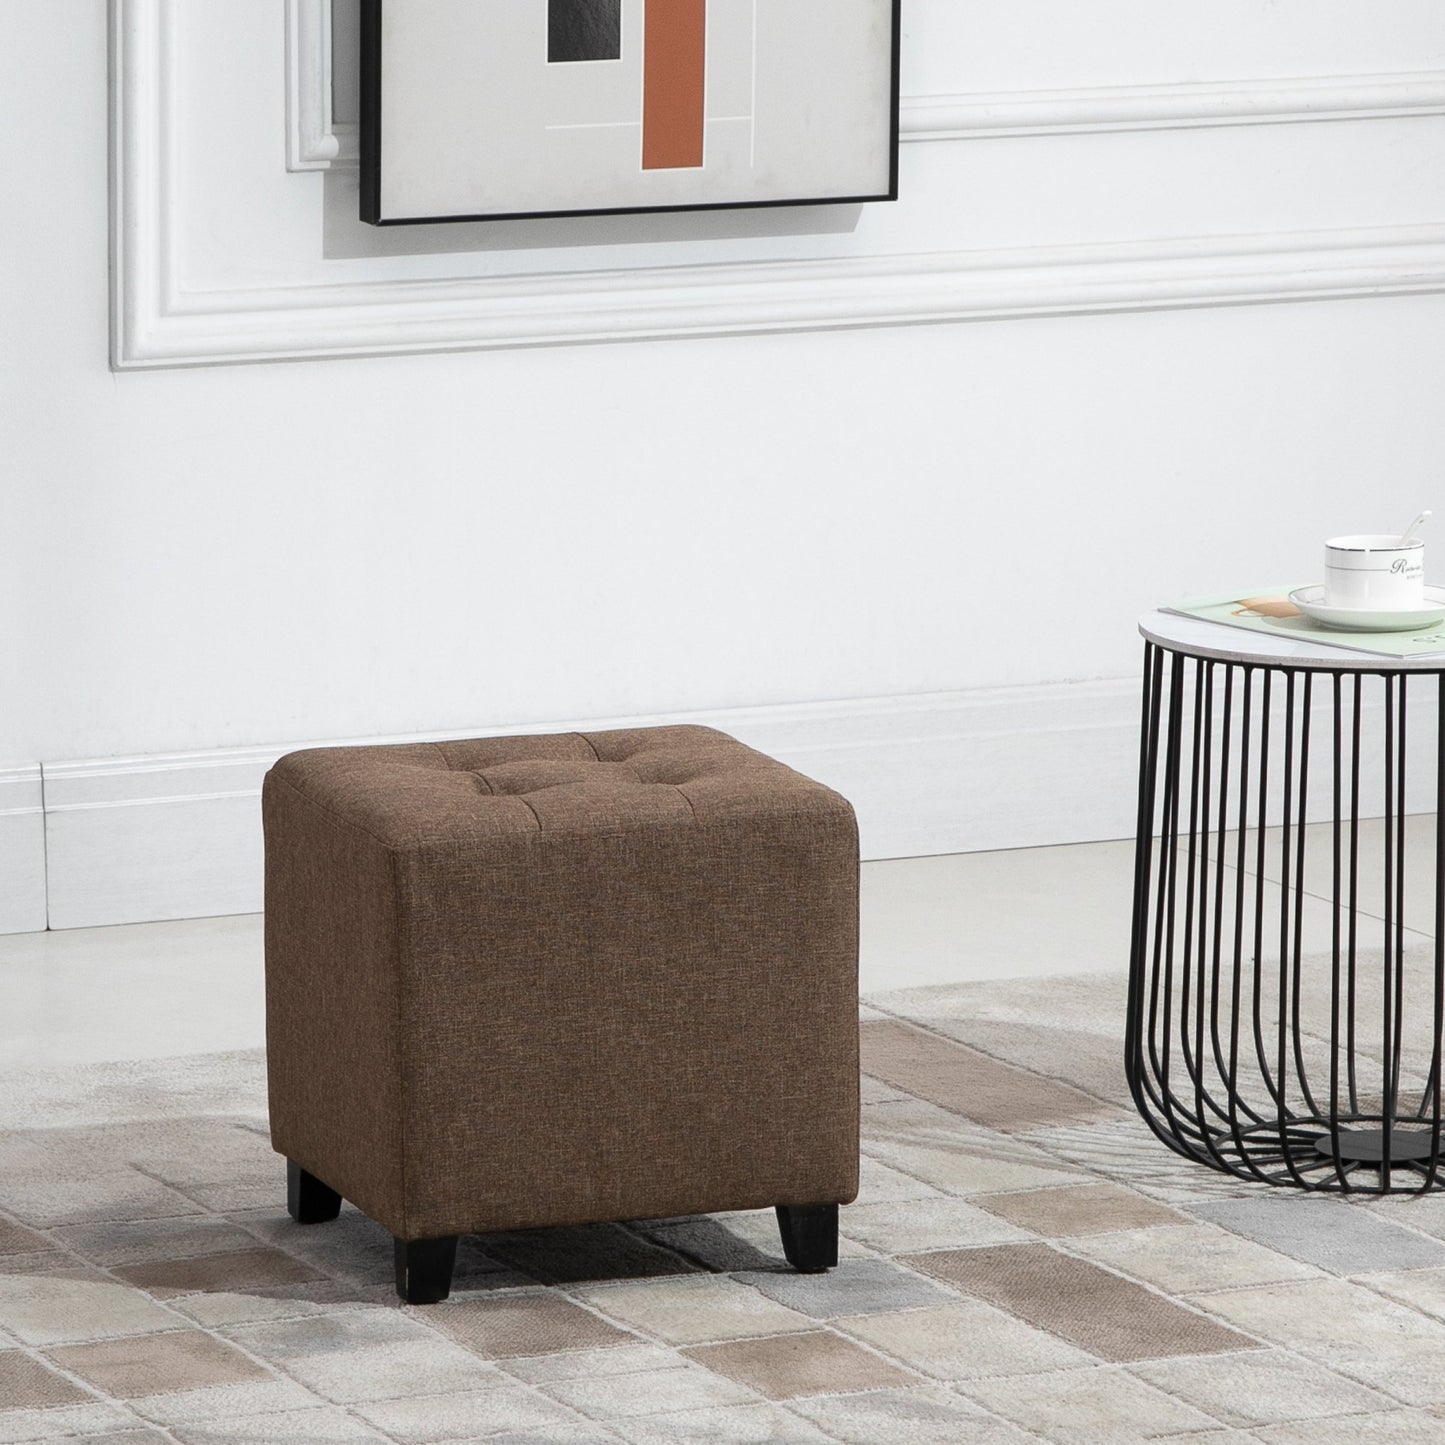 HOMCOM Footstool Ottoman Tufted Ottoman Coffee Table Linen-Touch Fabric Footrest -Brown